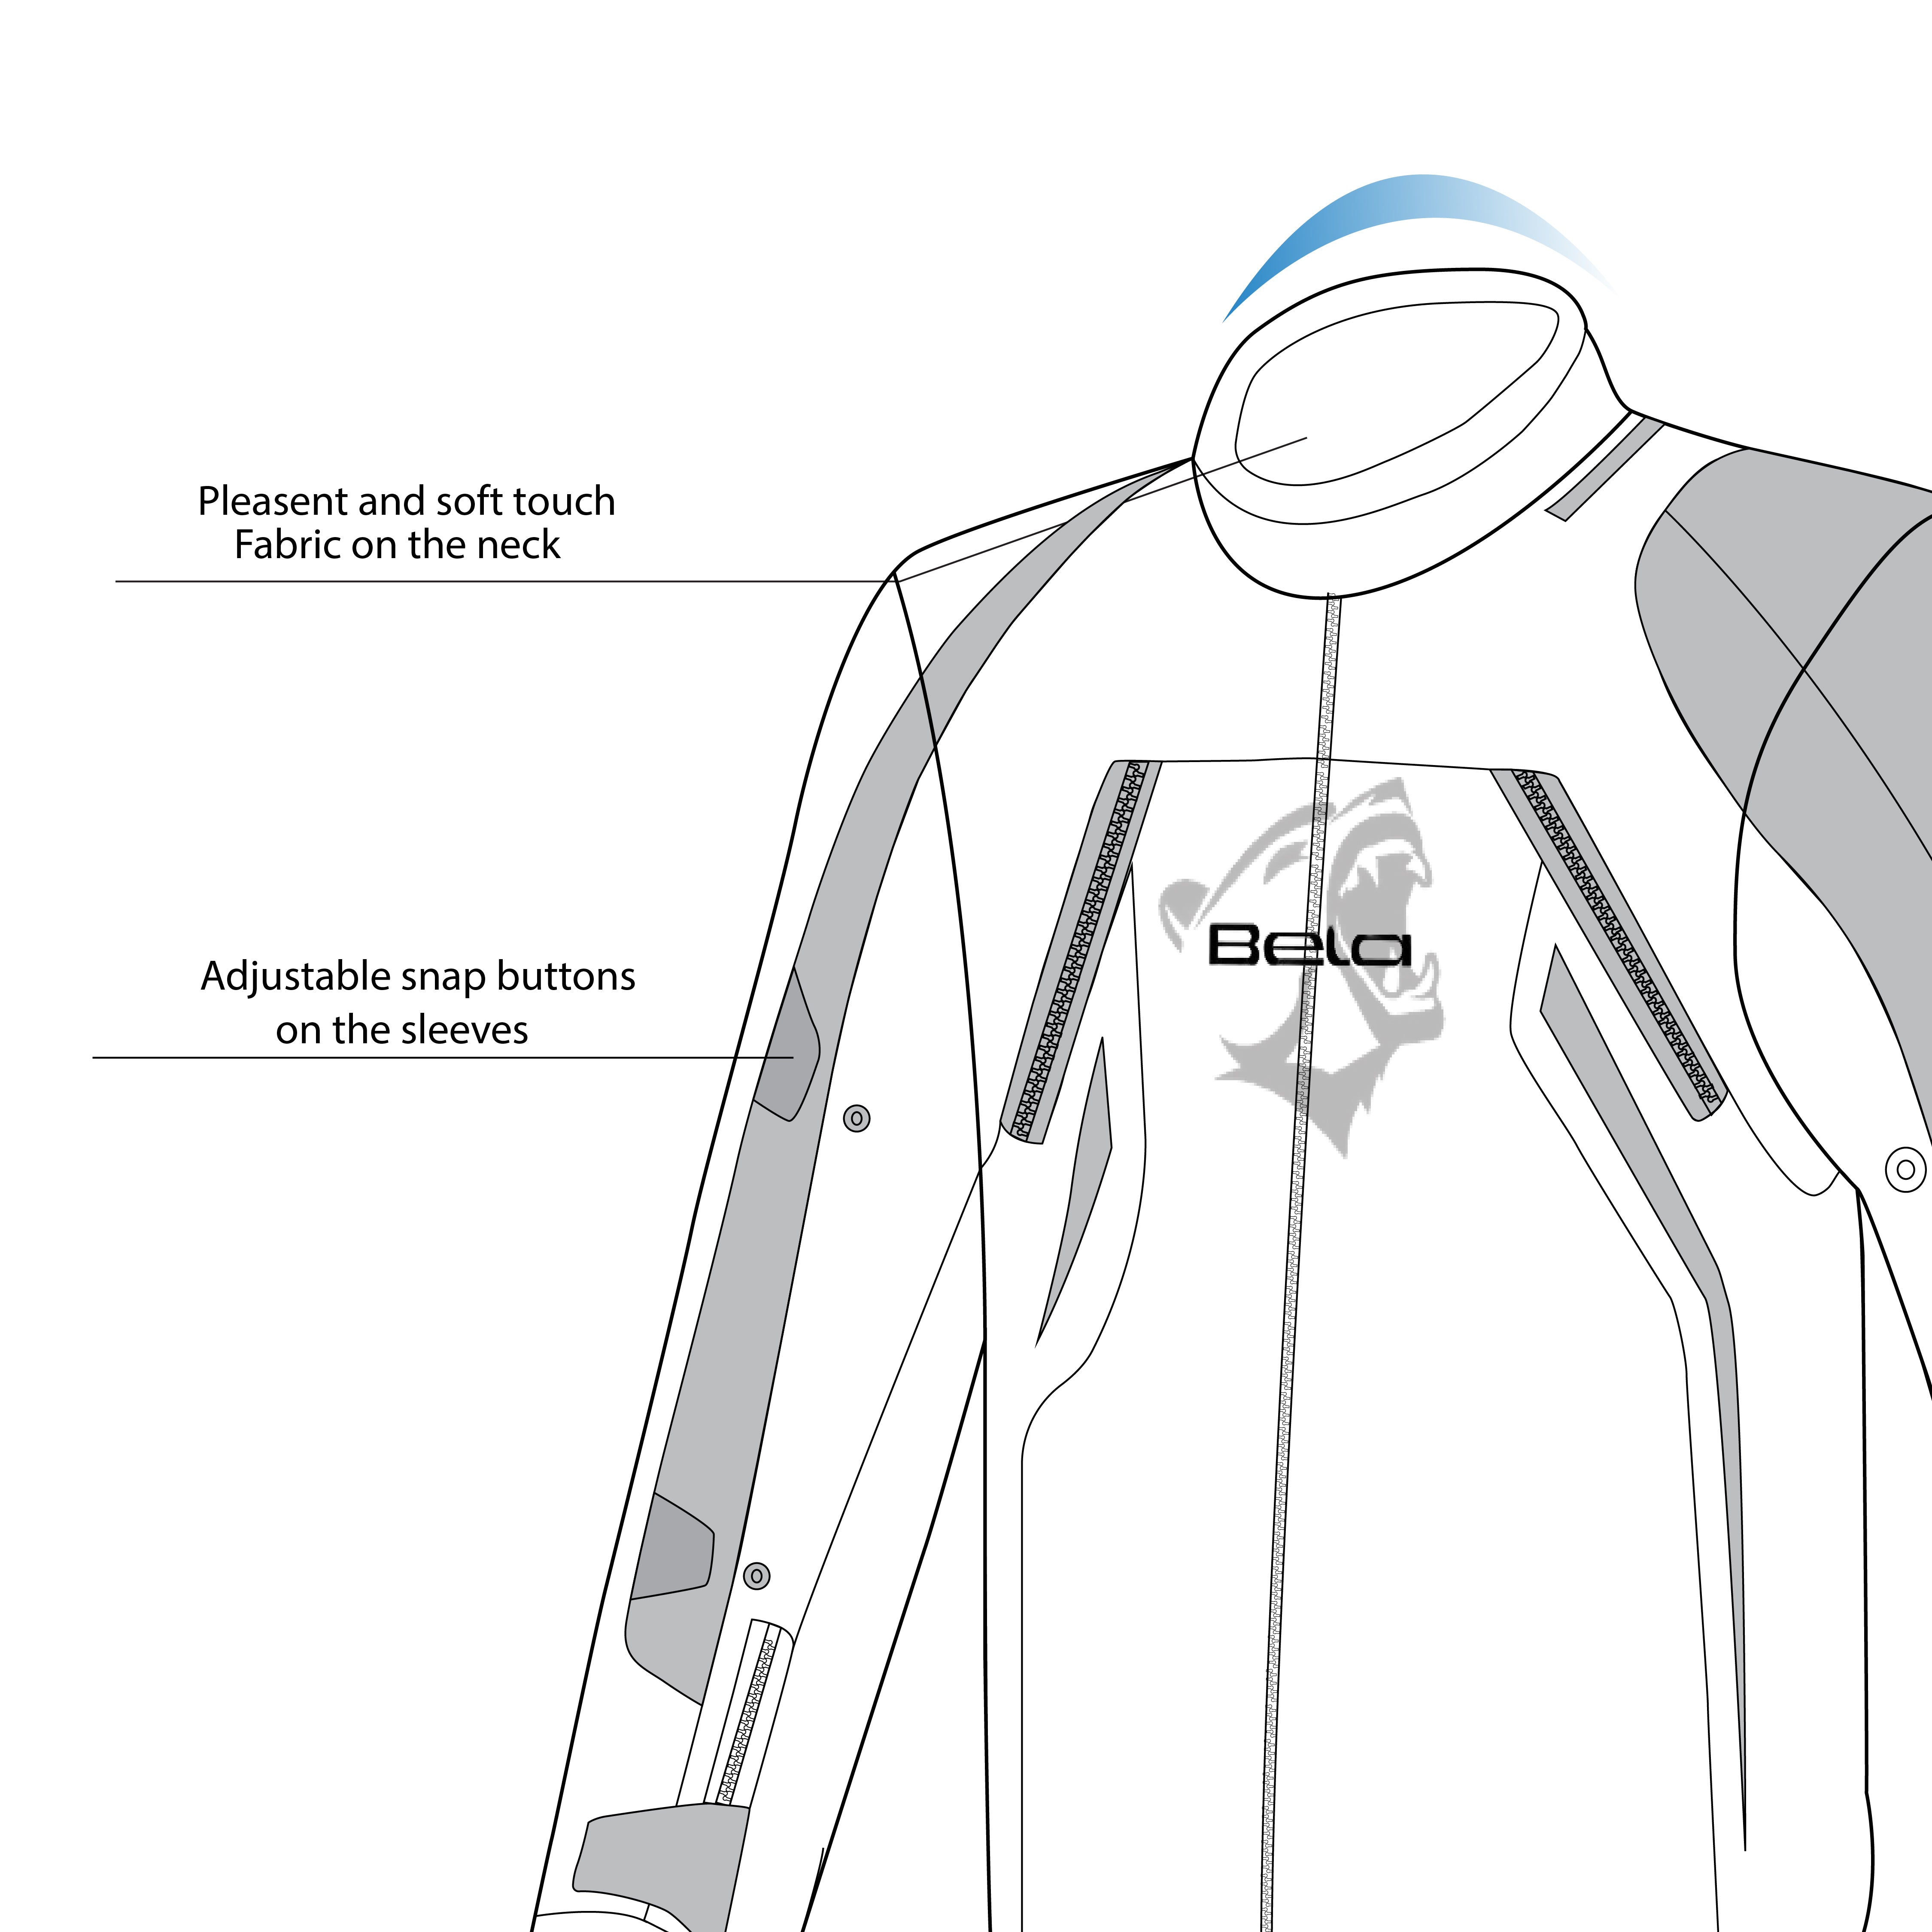 infographic sketch bela elanur lady textile jacket black, dark gray and pink top front side view